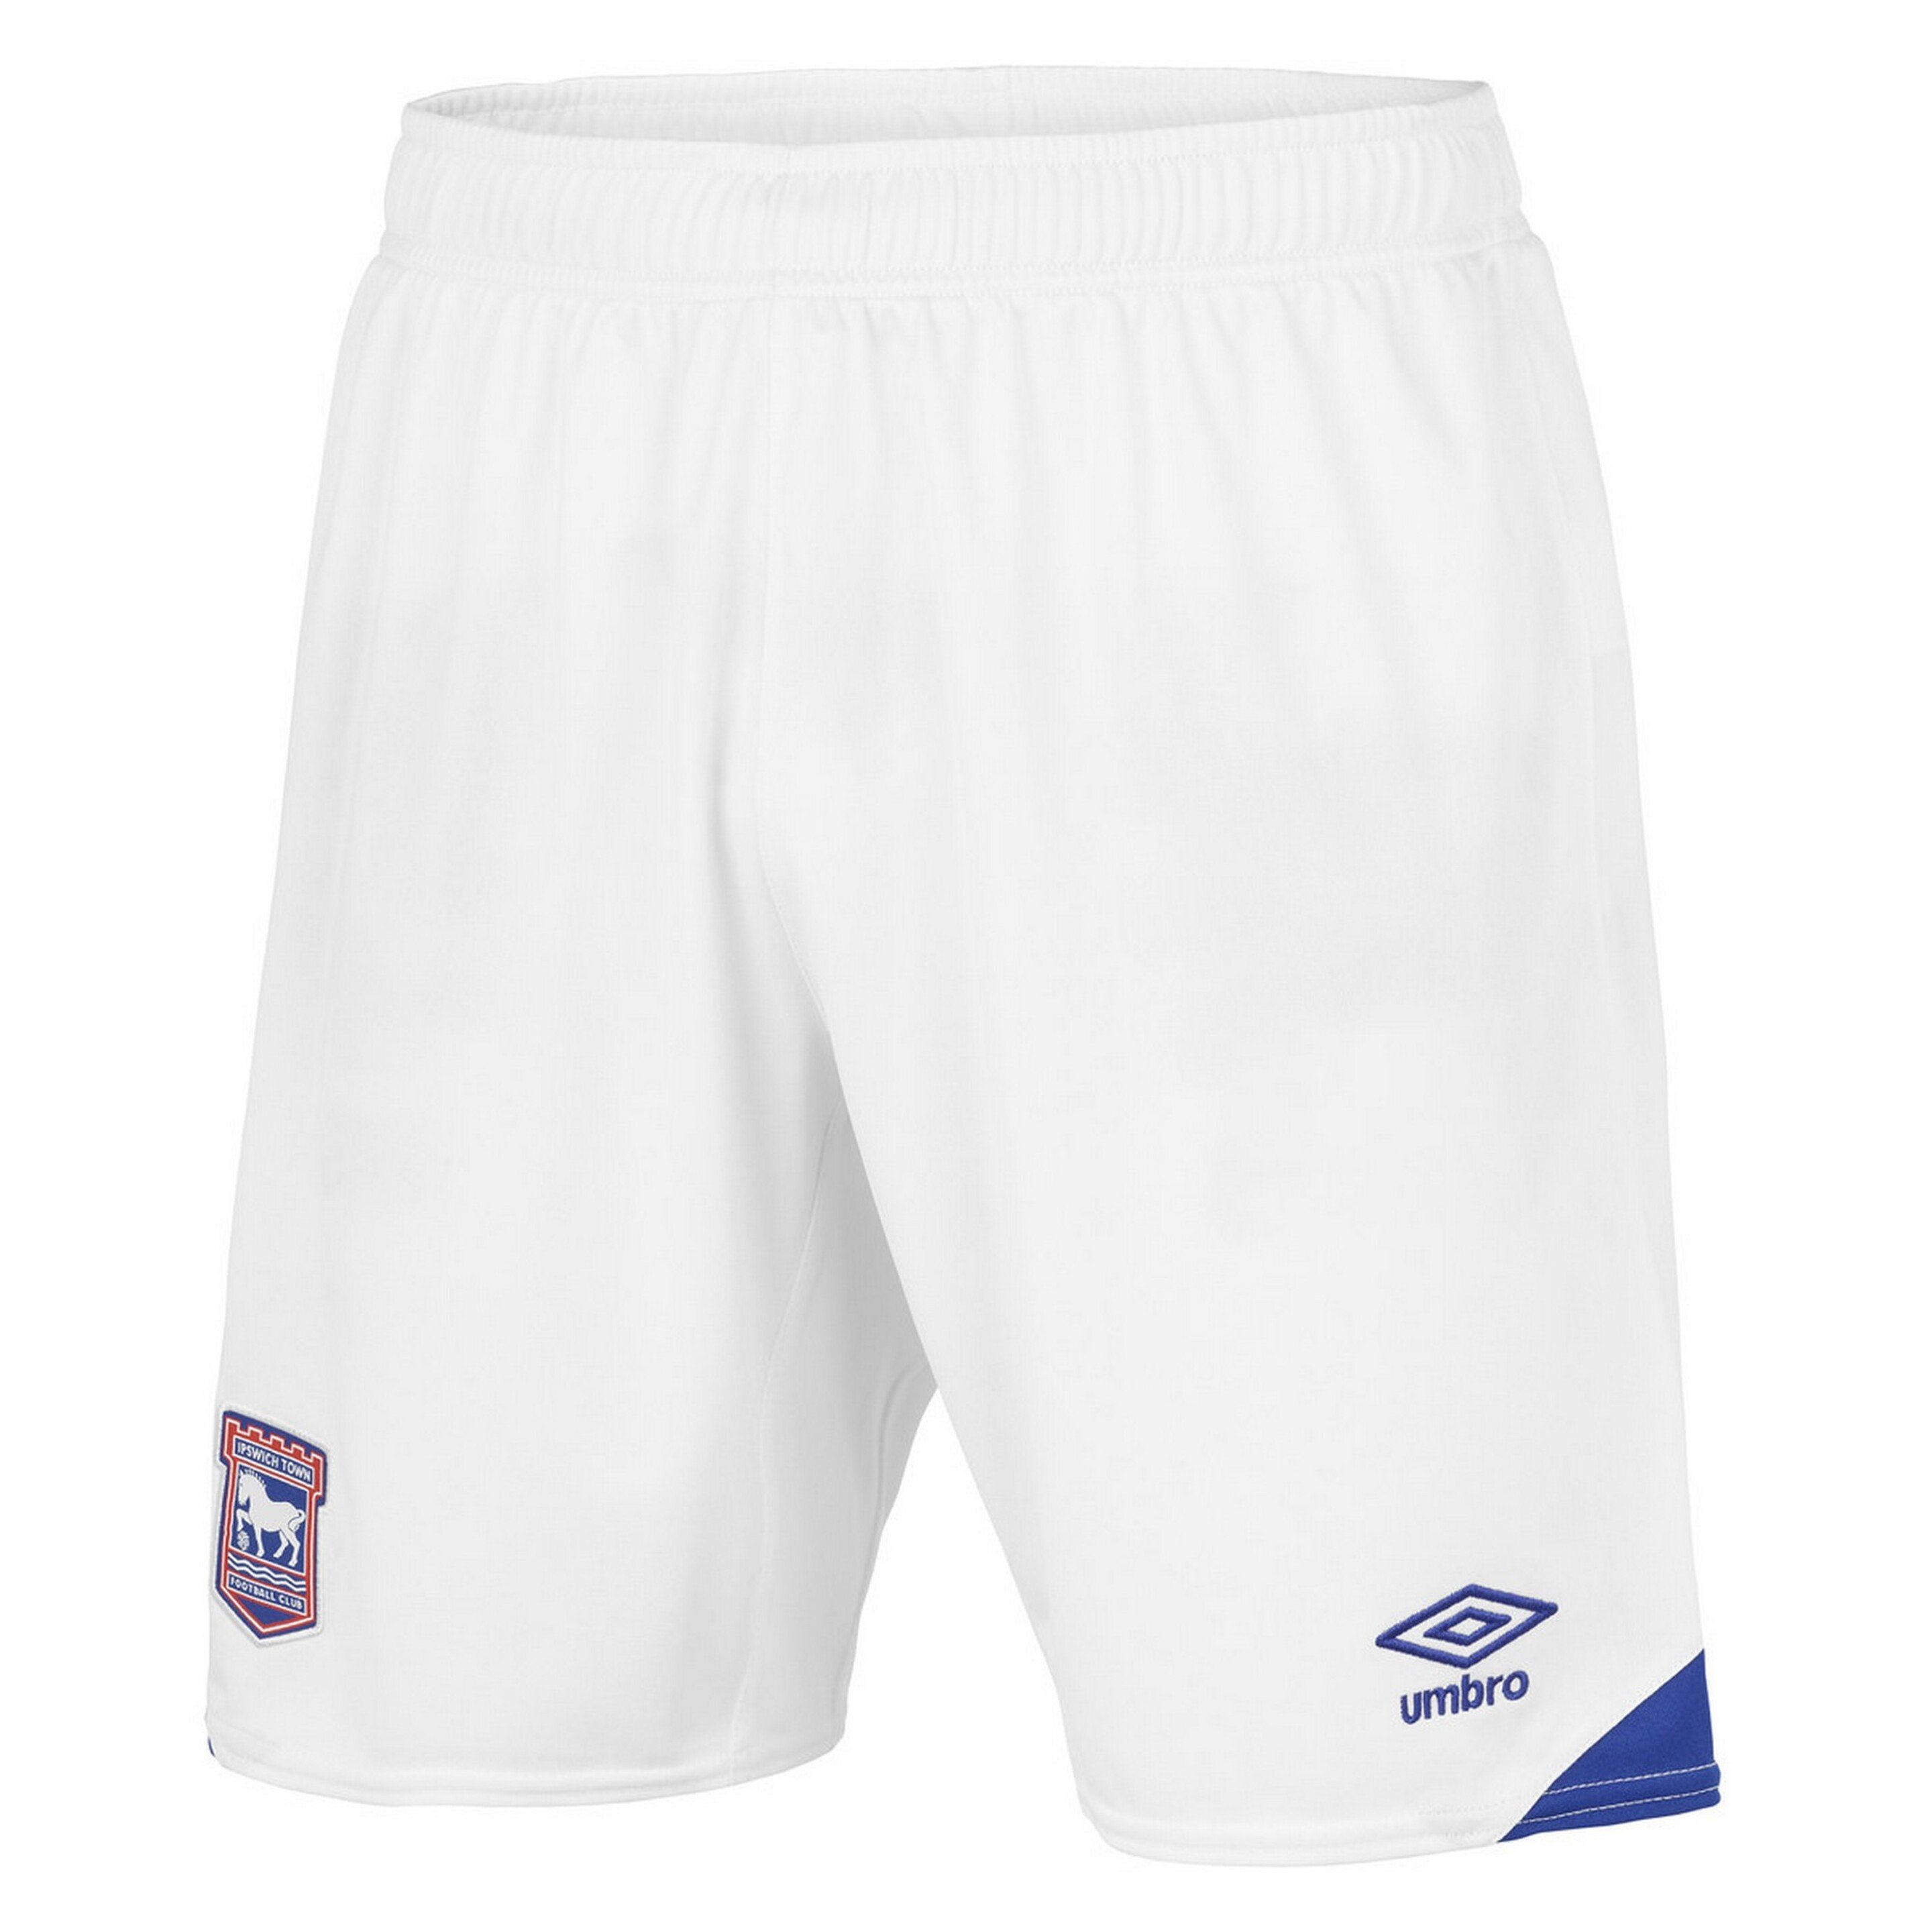 Ipswich Town Fc Mens 22/23 Home Shorts Umbro